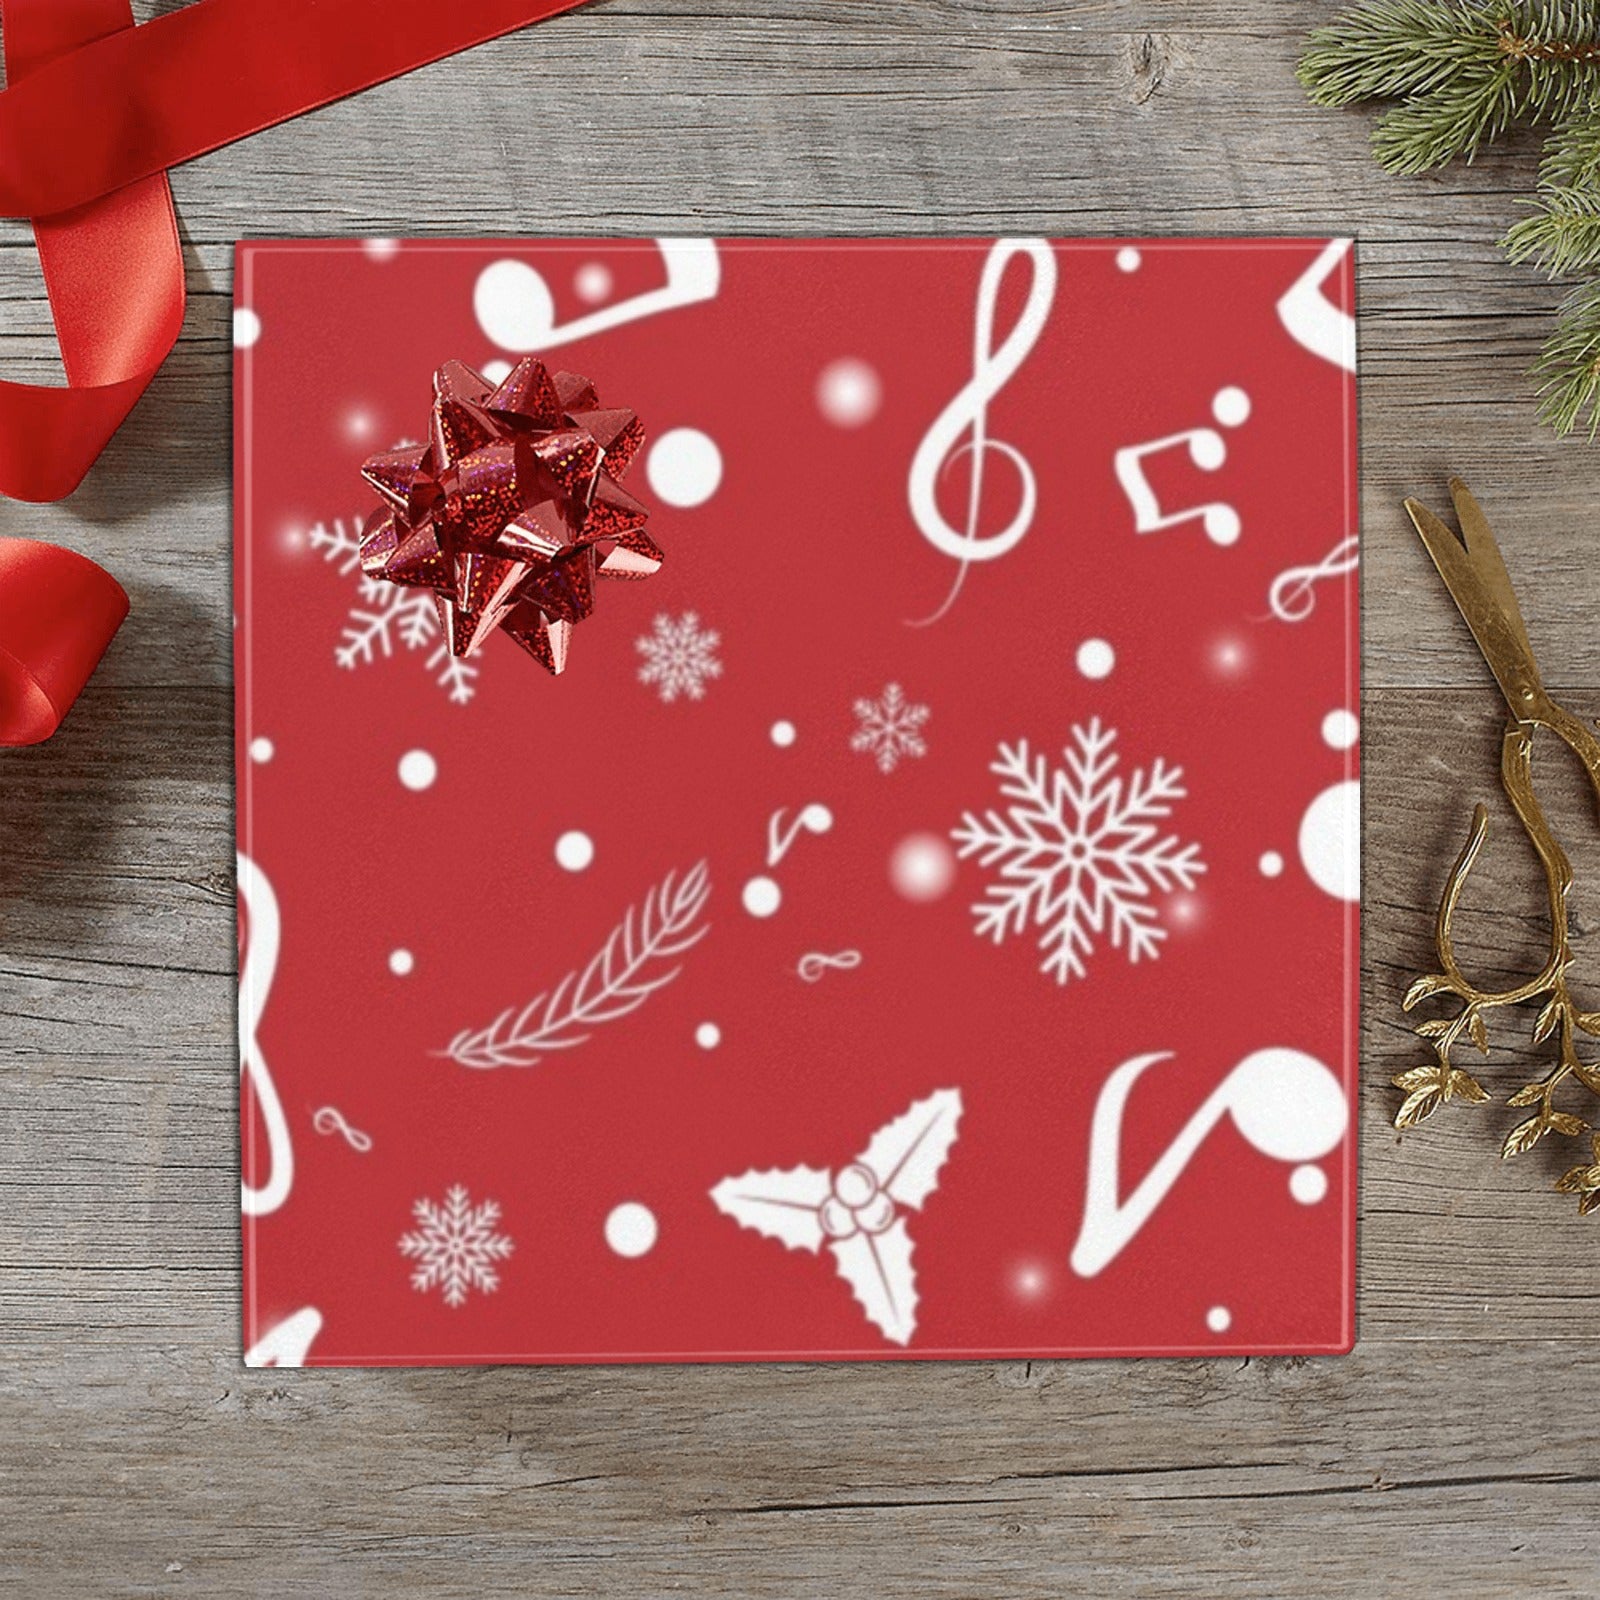 Solid Dark Cranberry Red Color Wrapping Paper by PodArtist